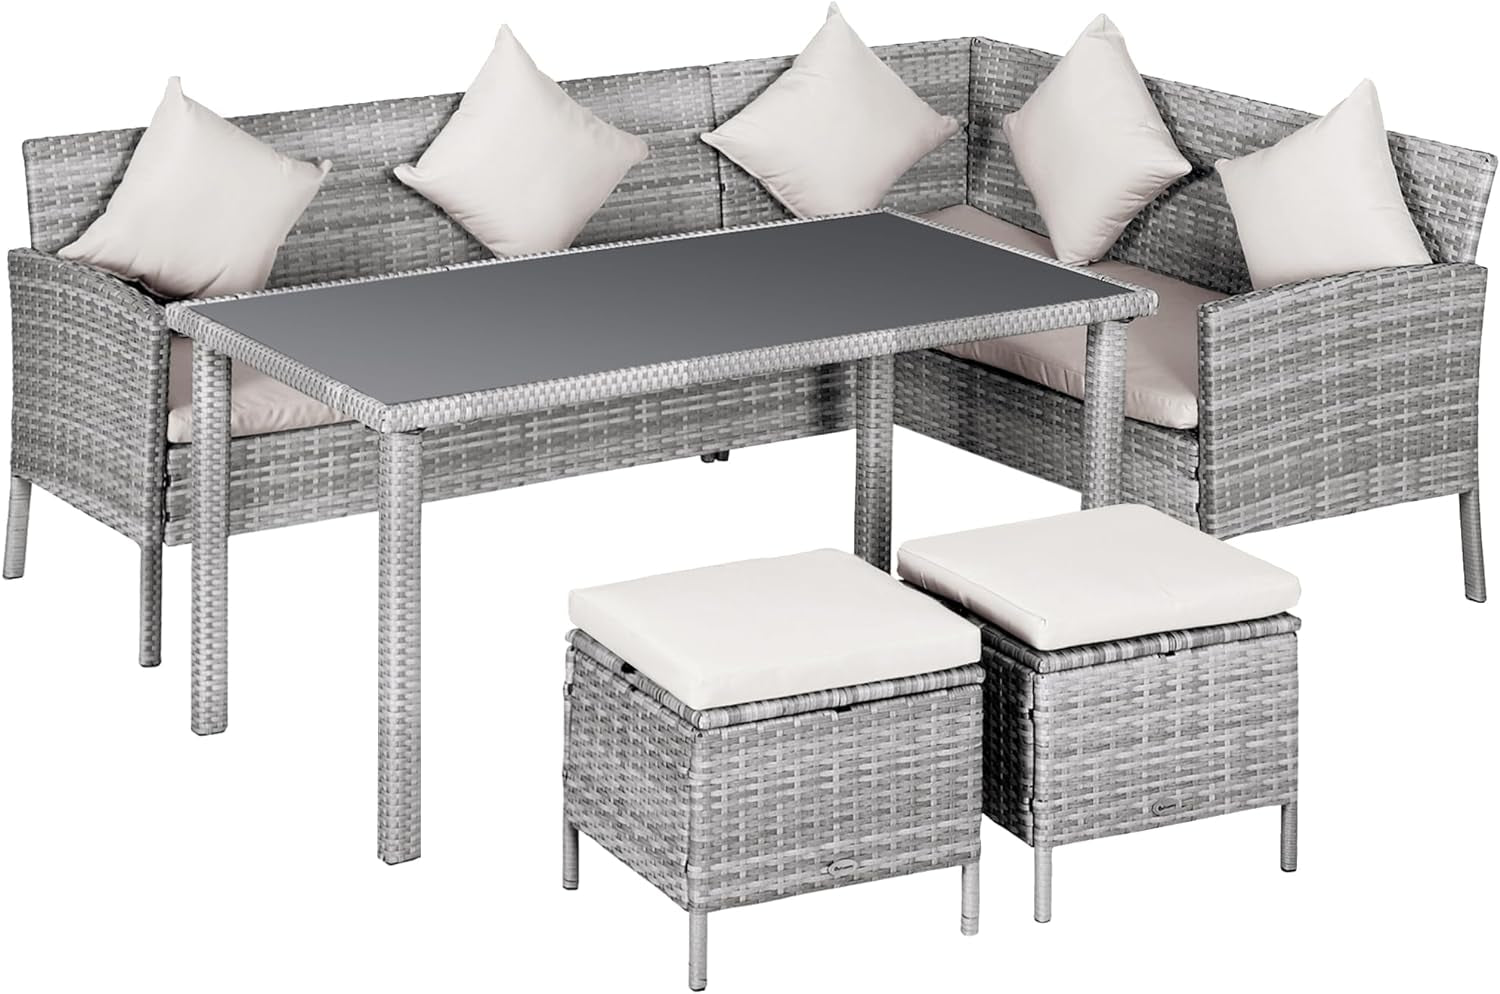 5 Pieces Wicker Patio Furniture Set with Padded Cushions, PE Rattan Conversation Furniture Sets W/Tempered Glass Top Dining Table and Two Ottomans, Cream White